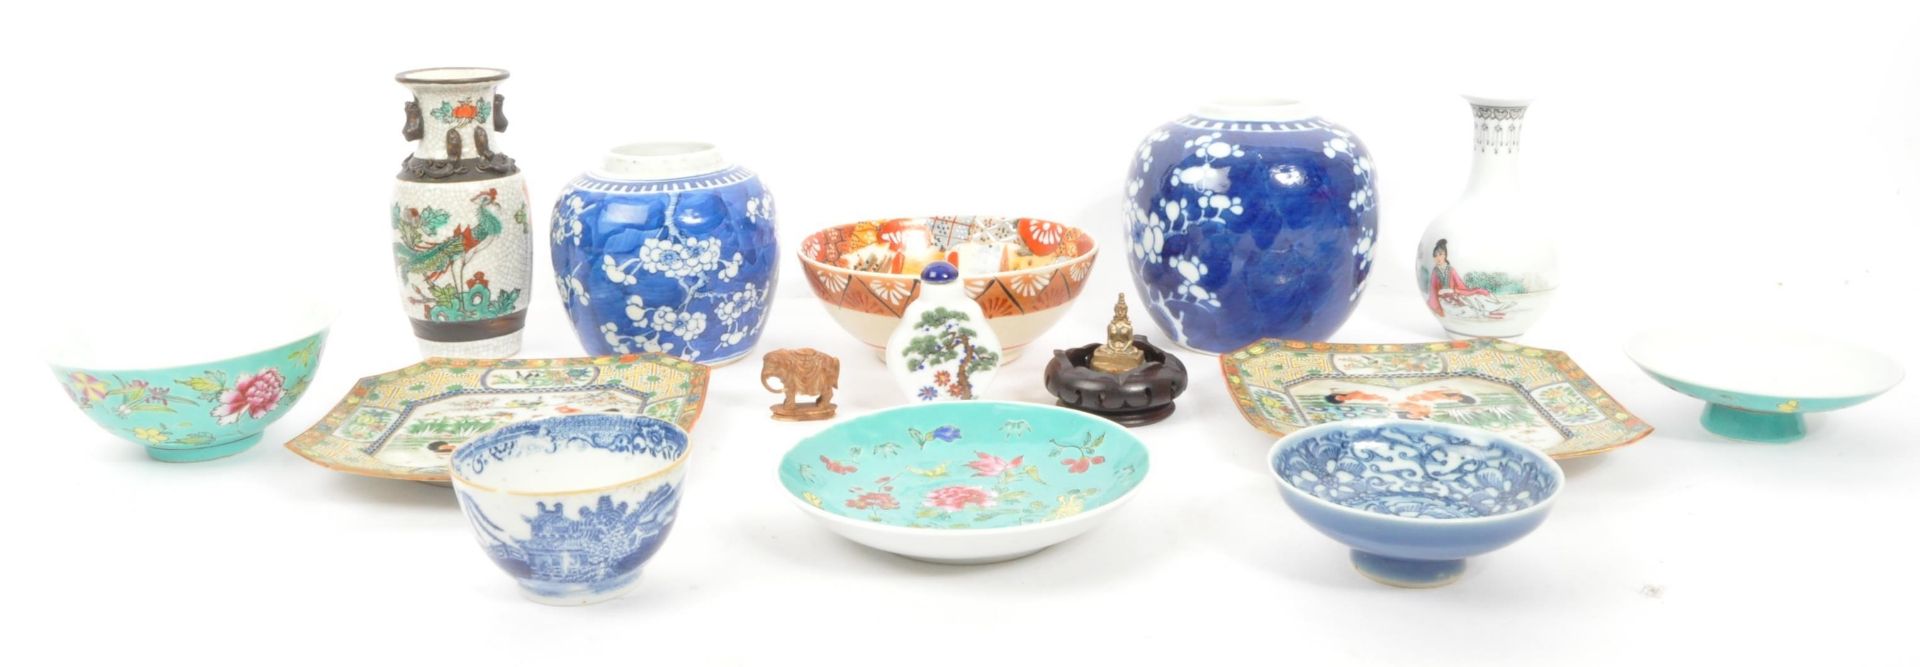 LARGE COLLECTION OF CHINESE PORCELAIN & CERAMIC ITEMS